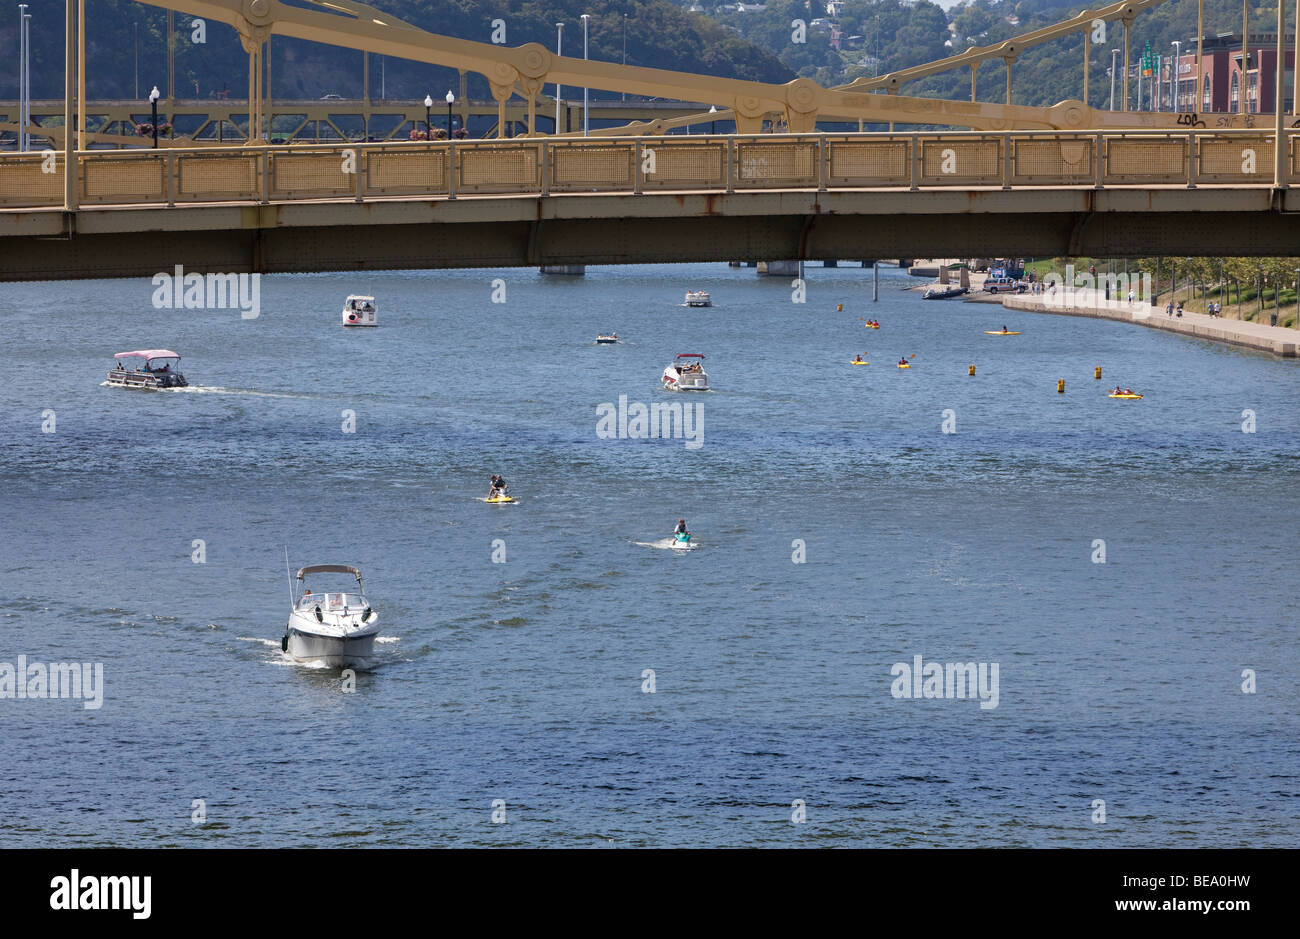 Boaters on the Allegheny River at Pittsburgh Stock Photo